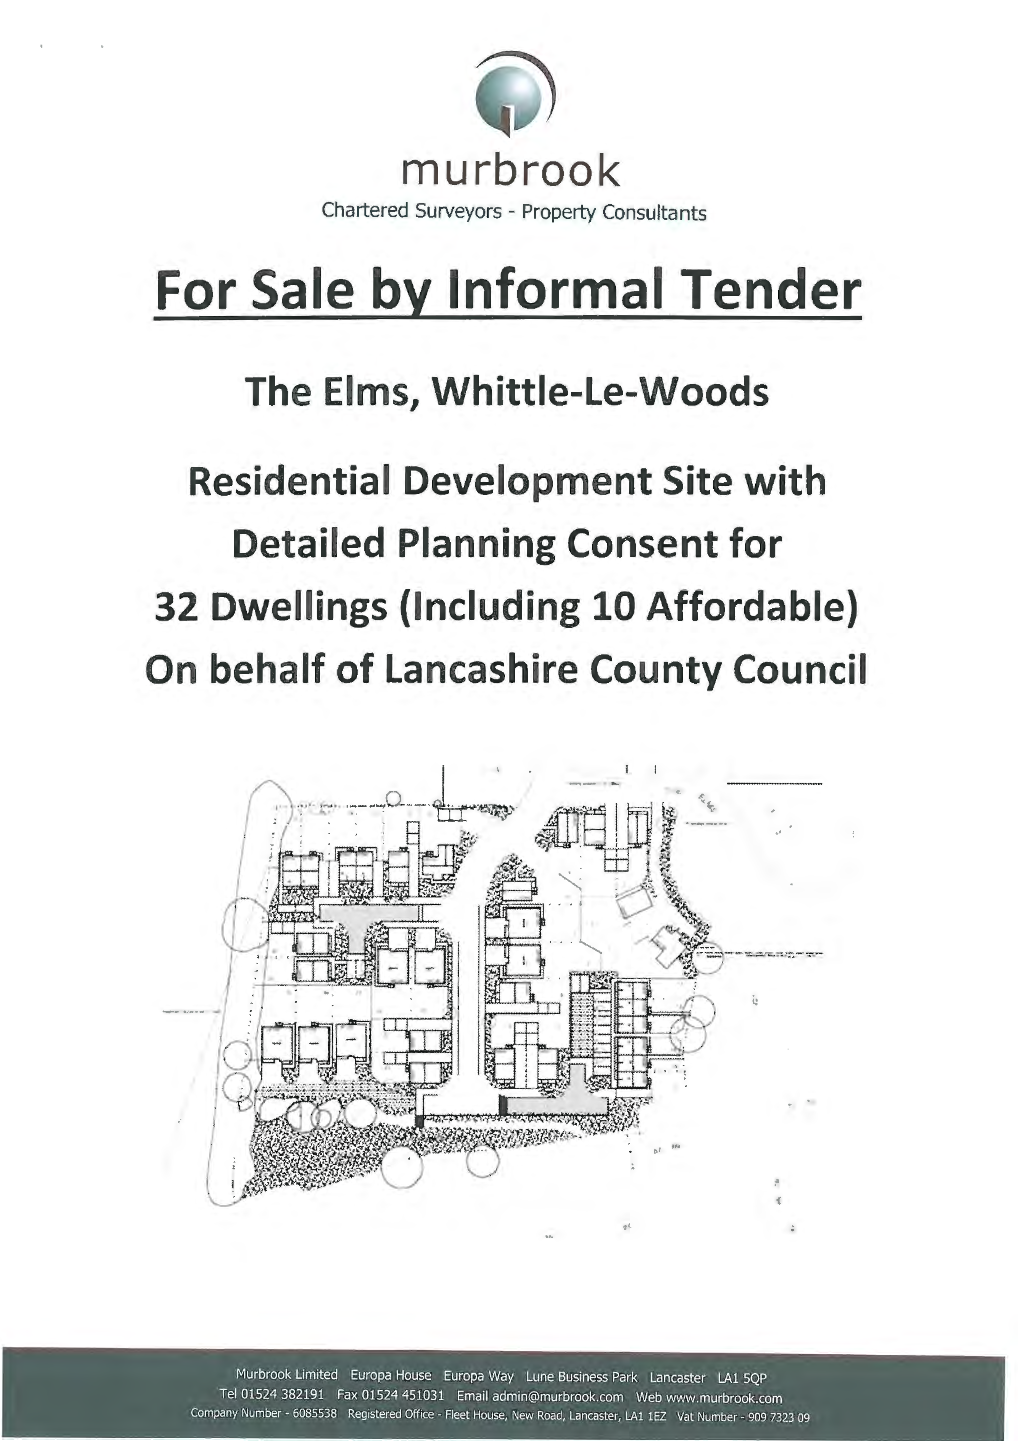 For Sale by Informal Tender the Elms, Whittle-Le-Woods Residential Development Site with Detailed Planning Consent for 32 Dwellings